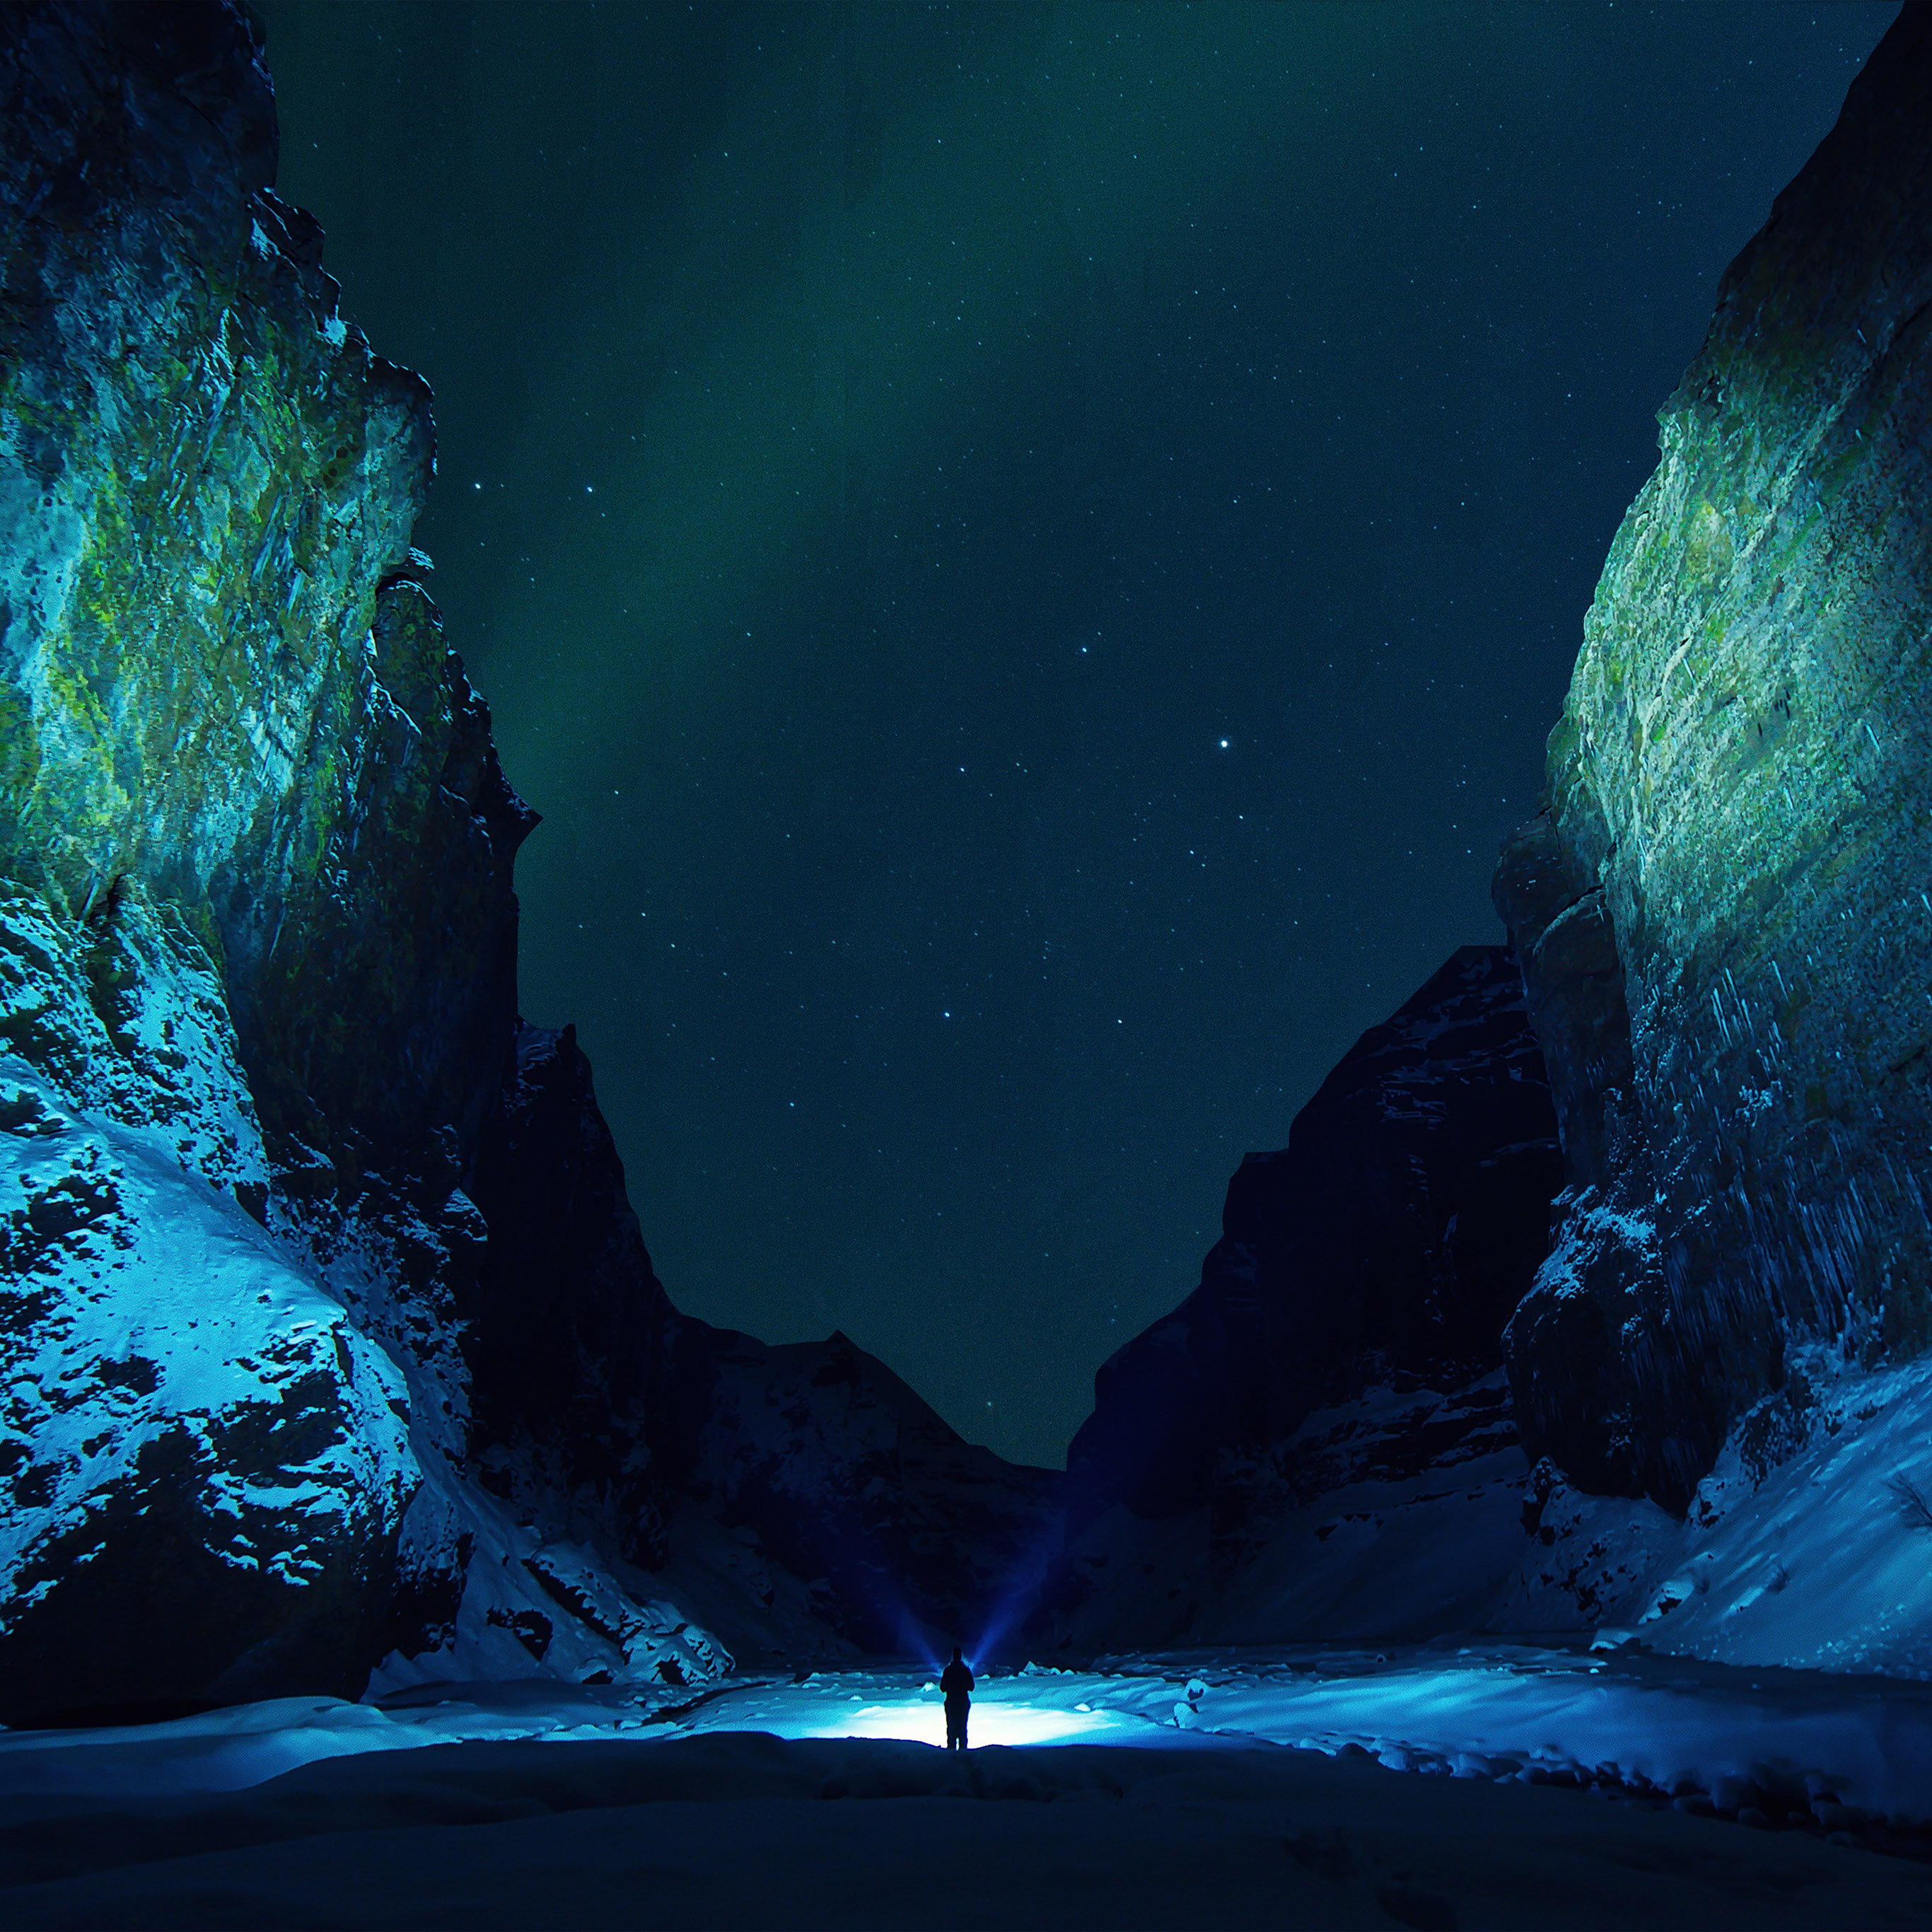 Night Scenery Wallpapers - Wallpaper Cave